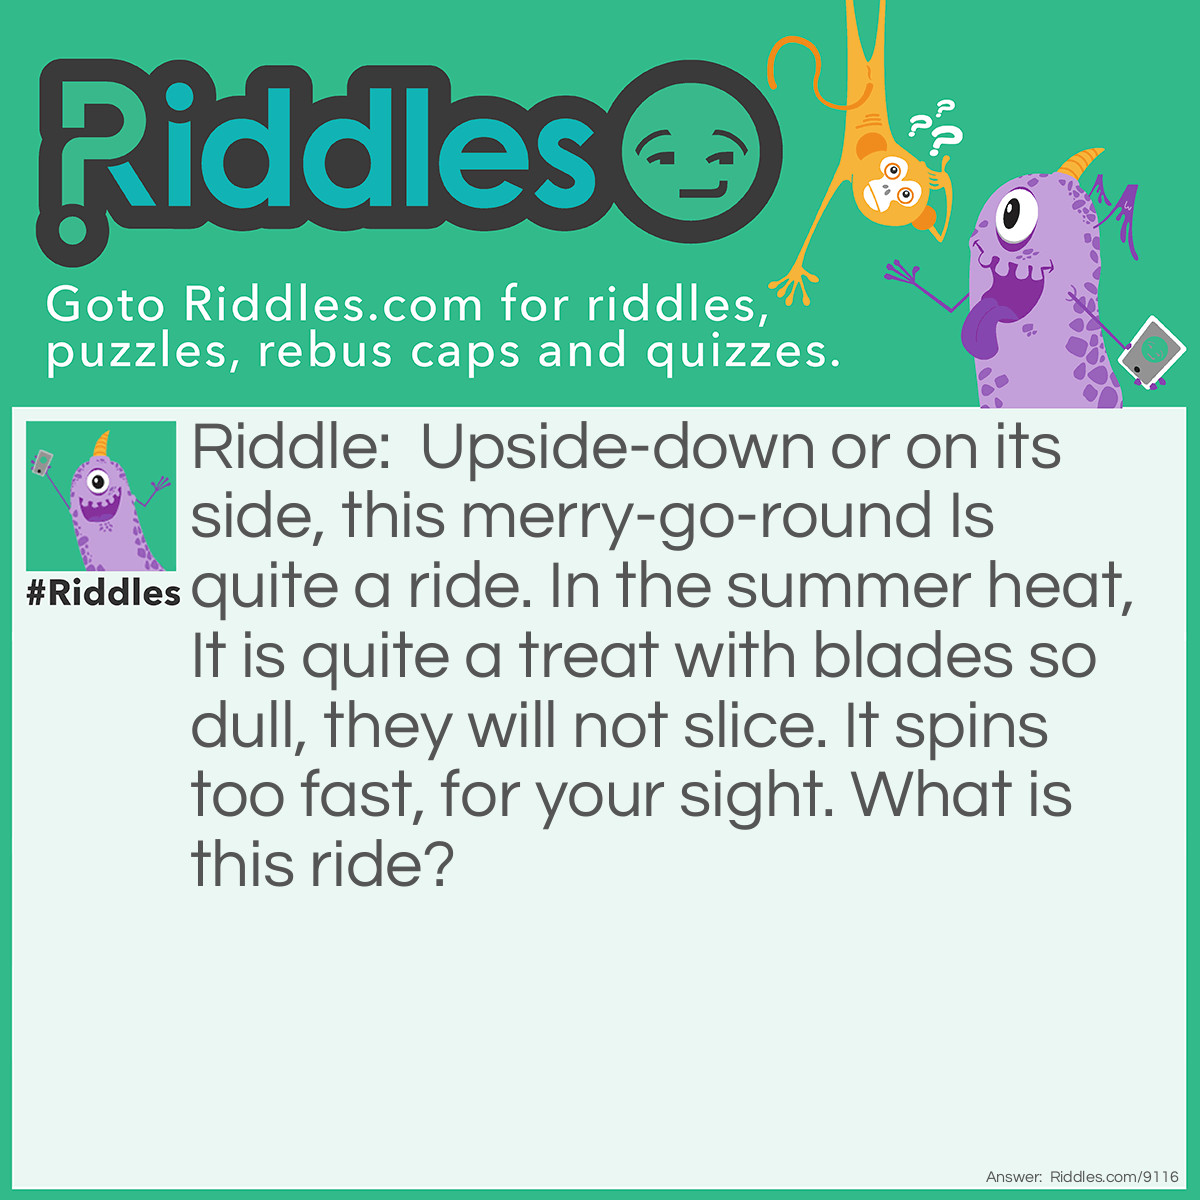 Riddle: Upside-down or on its side, this merry-go-round Is quite a ride. In the summer heat, It is quite a treat with blades so dull, they will not slice. It spins too fast, for your sight. What is this ride? Answer: A motorized fan.